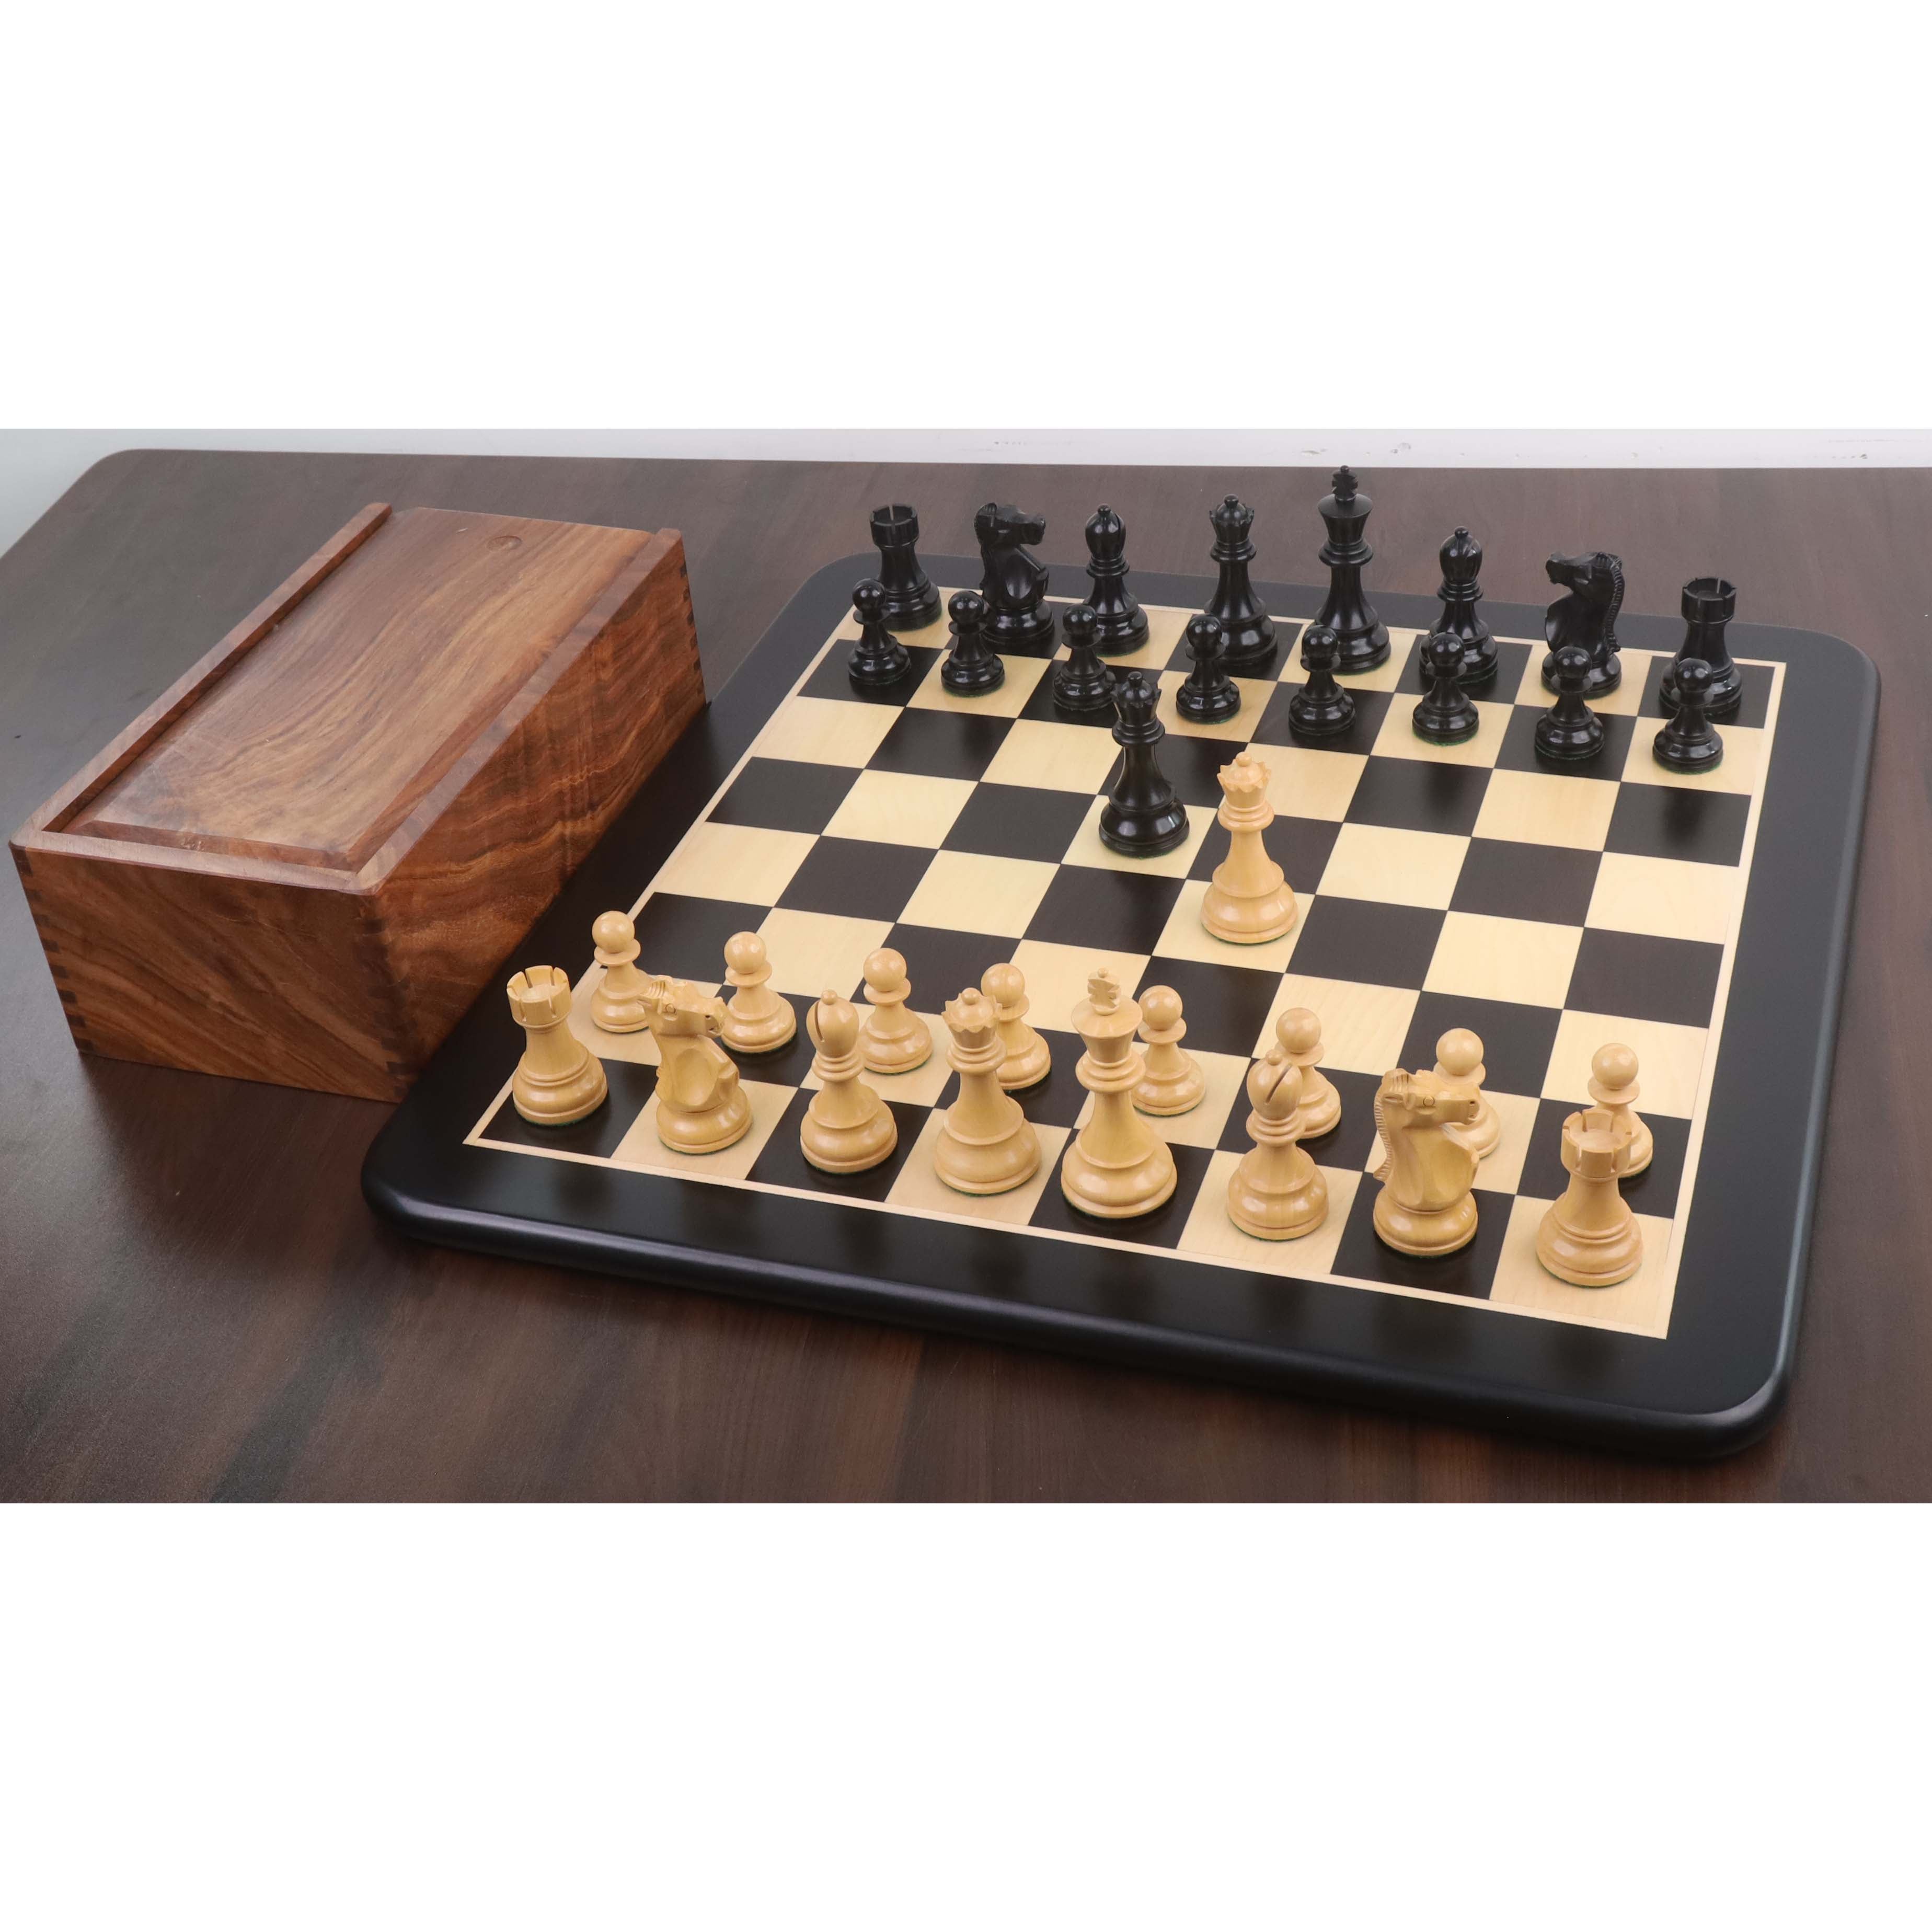 1972 Championship Fischer Spassky Chess Set- Chess Pieces Only - Double Weighted Ebony wood